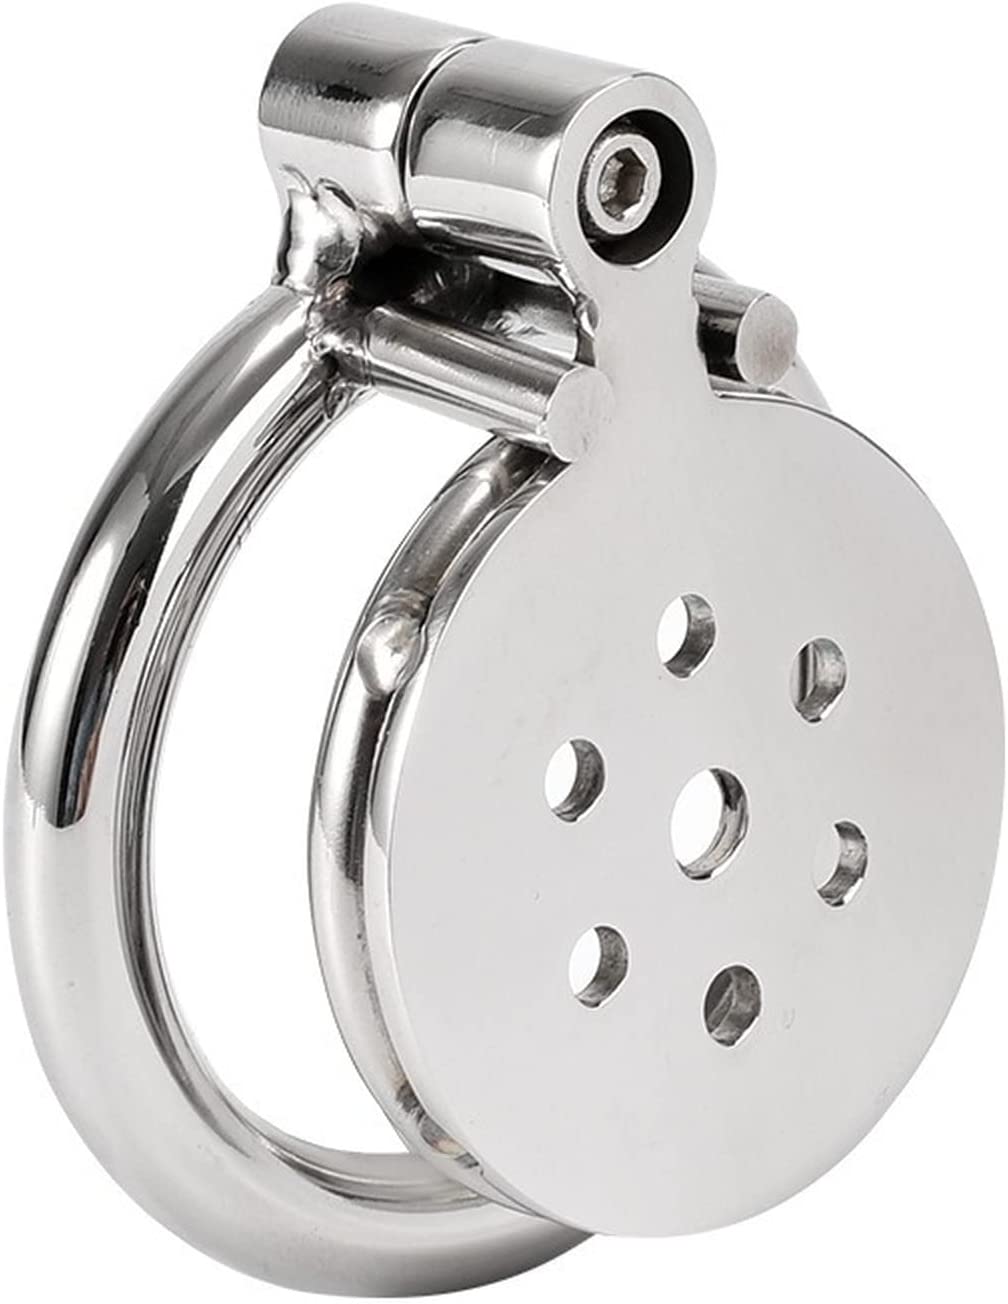 Stainless Steel Male Chastity Cage Metal Male Flat Chastity Lock Strap –  Monnik Latex